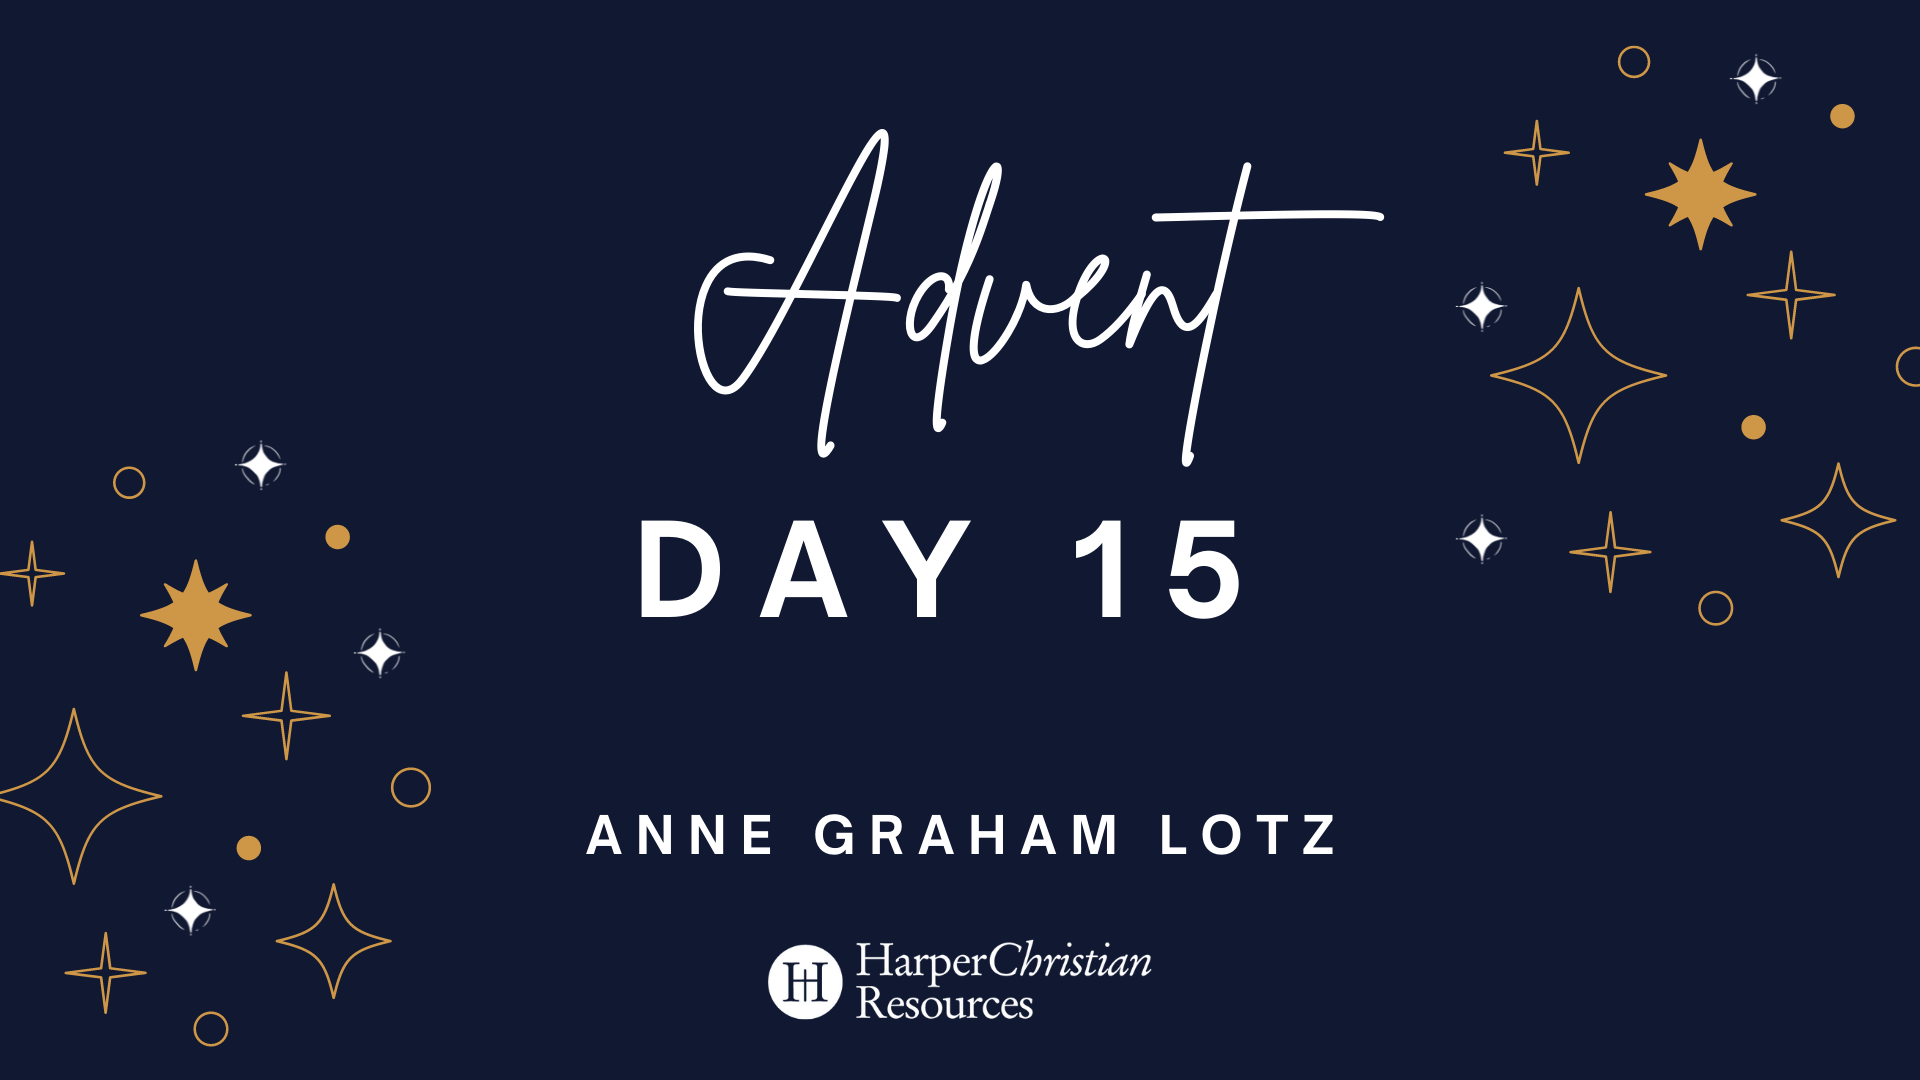 Advent Day 15: A message from Anne Graham Lotz